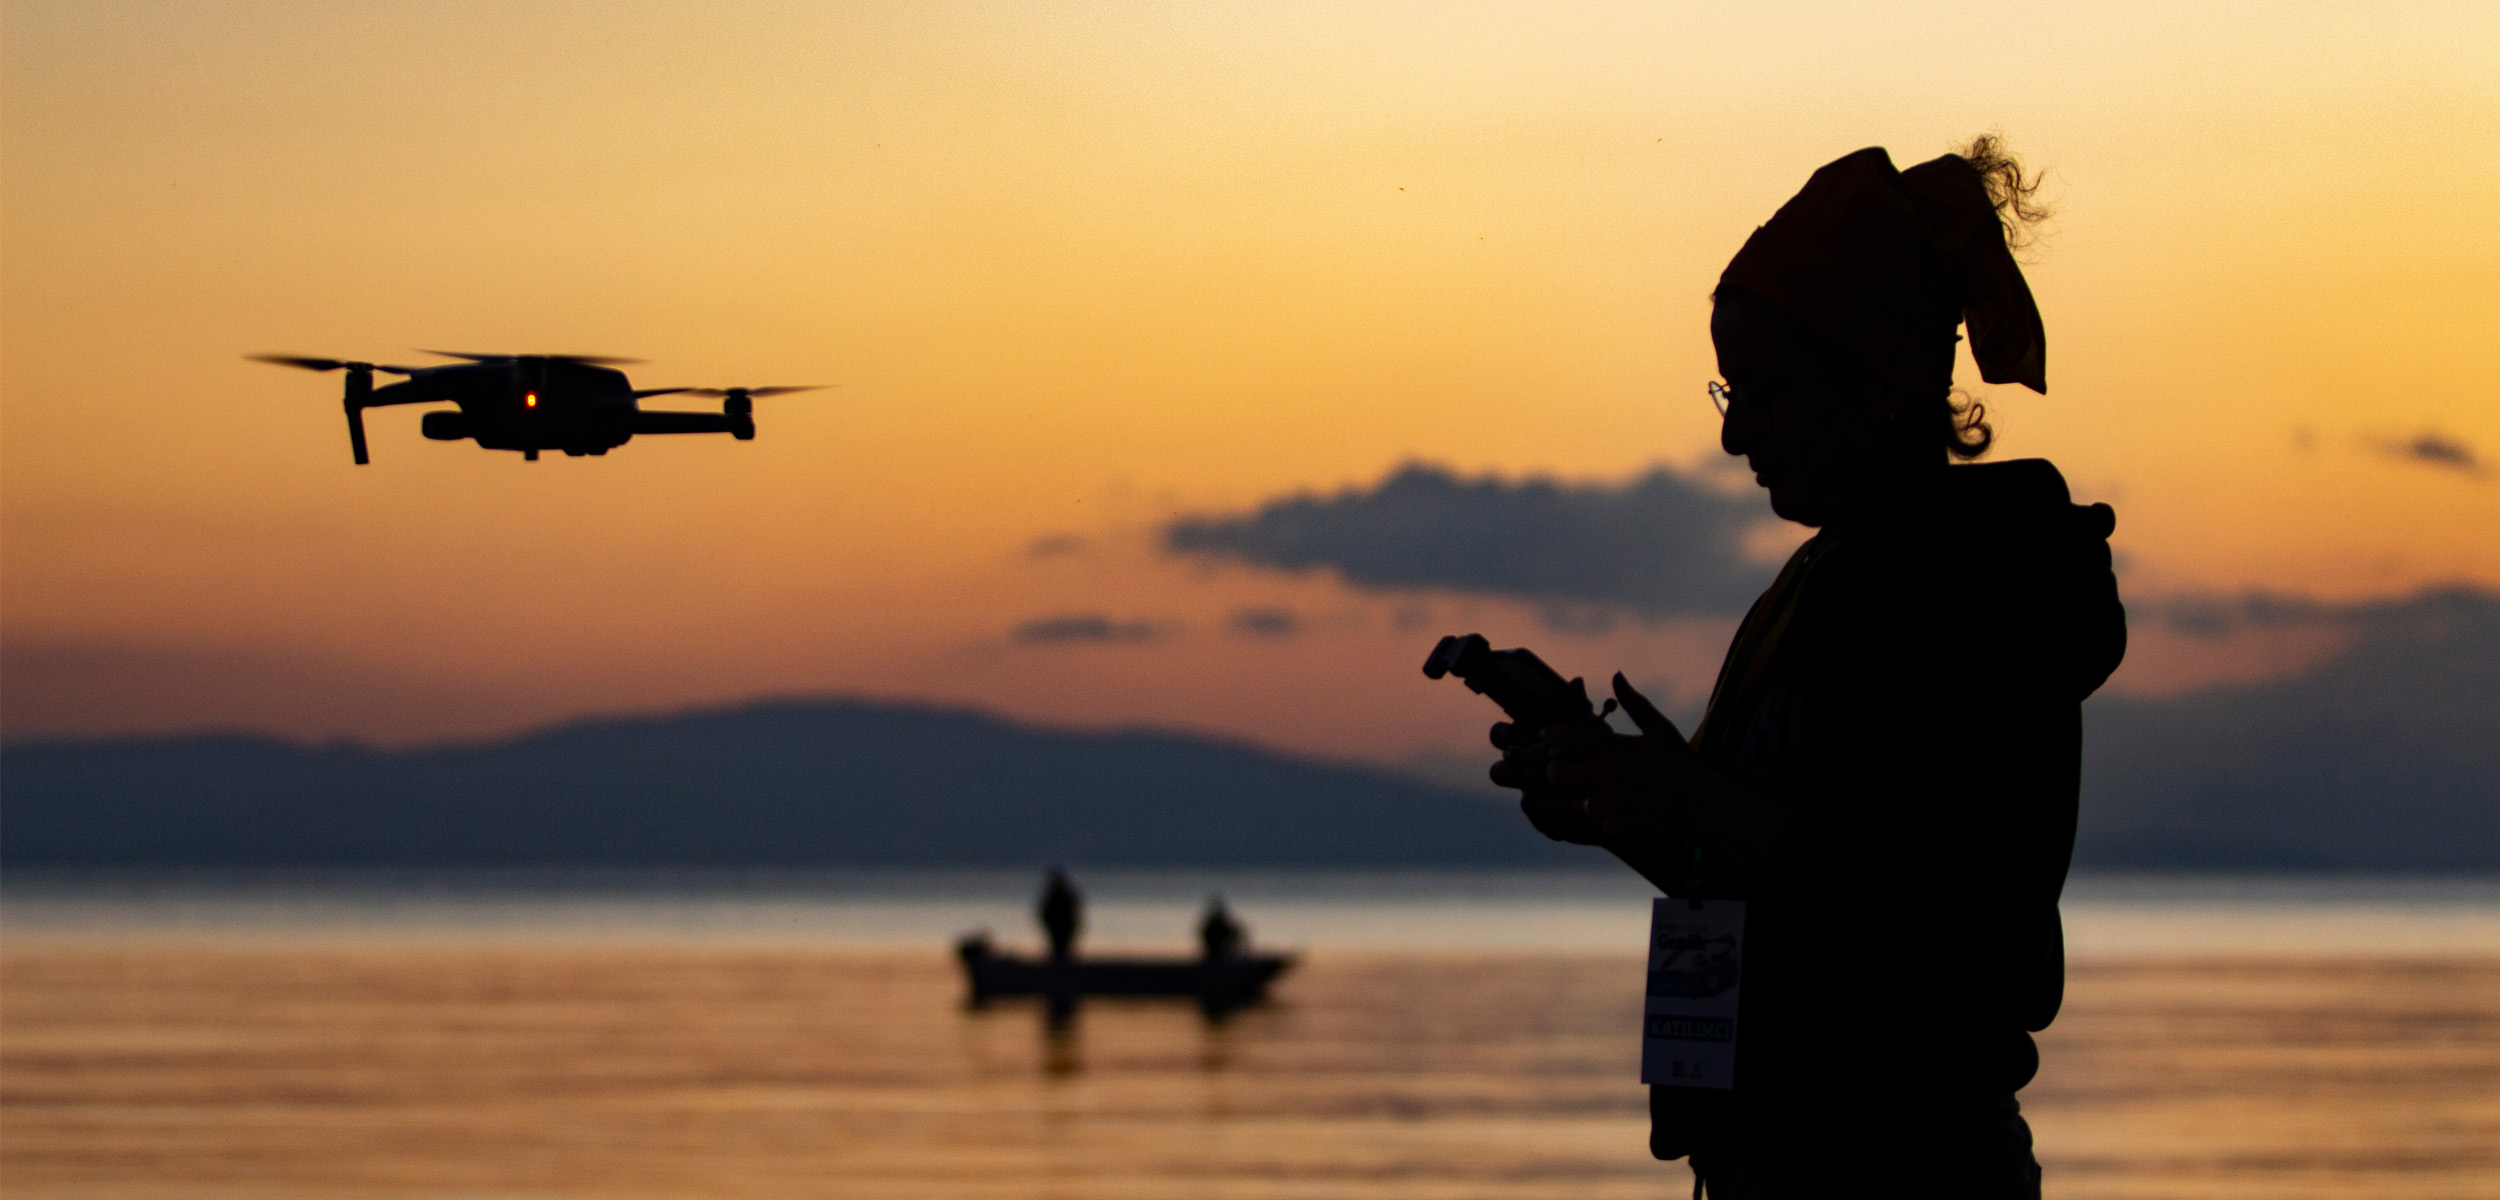 silhouette of young woman flying drone at sunset. Sea and fishing boat in the background. drone and woman taken in reverse light.